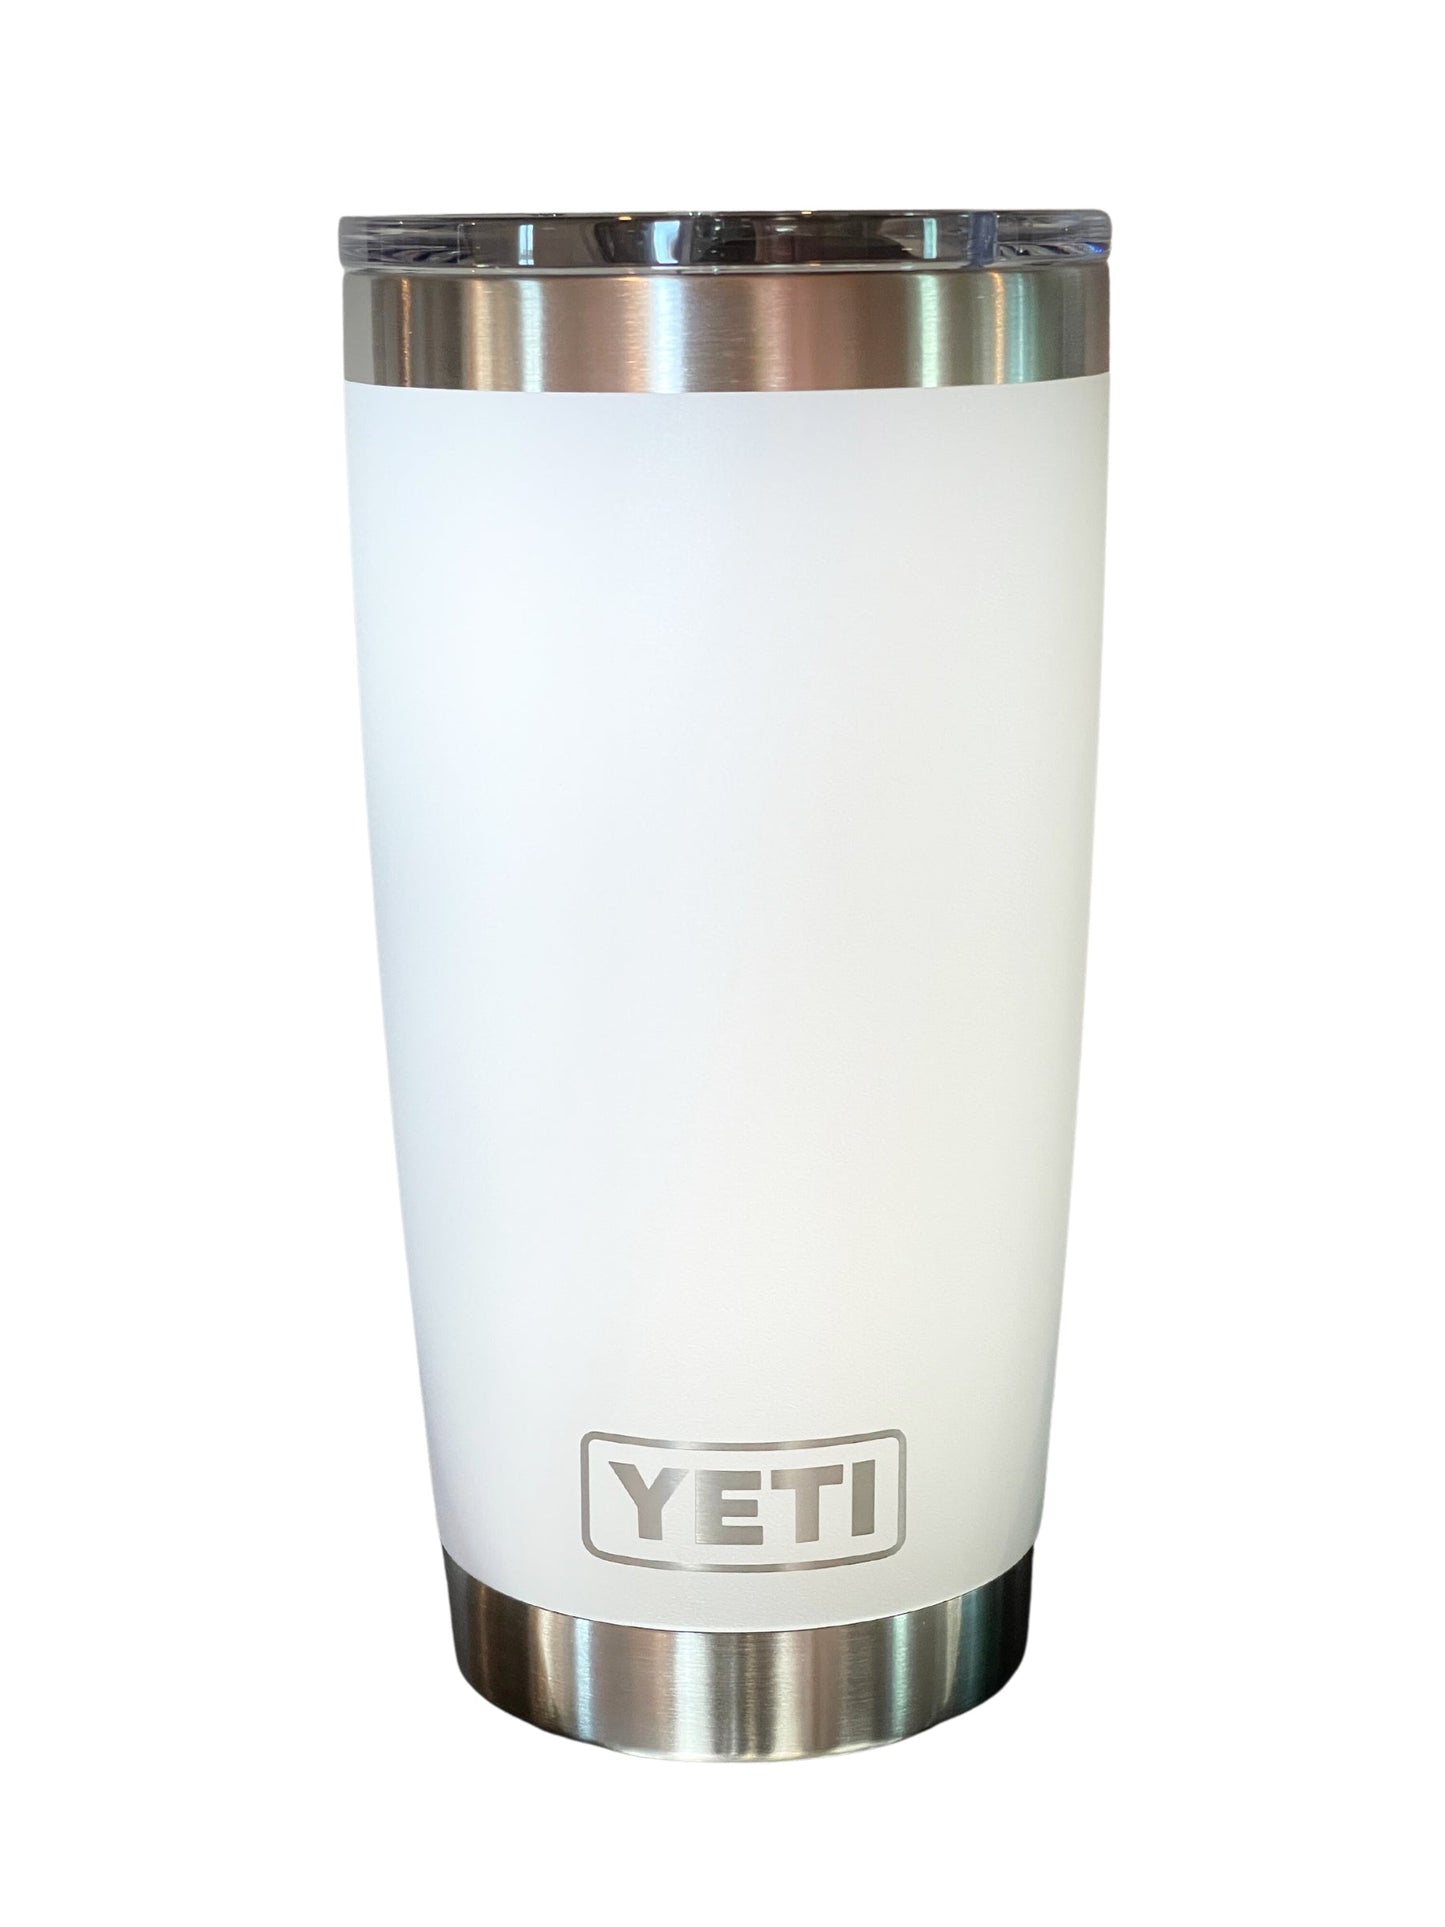 Custom Engraved Yeti Tumbler for Hockey Coaches & Players – 20oz/30oz Insulated Stainless Steel Cup with Personalized Coach Name